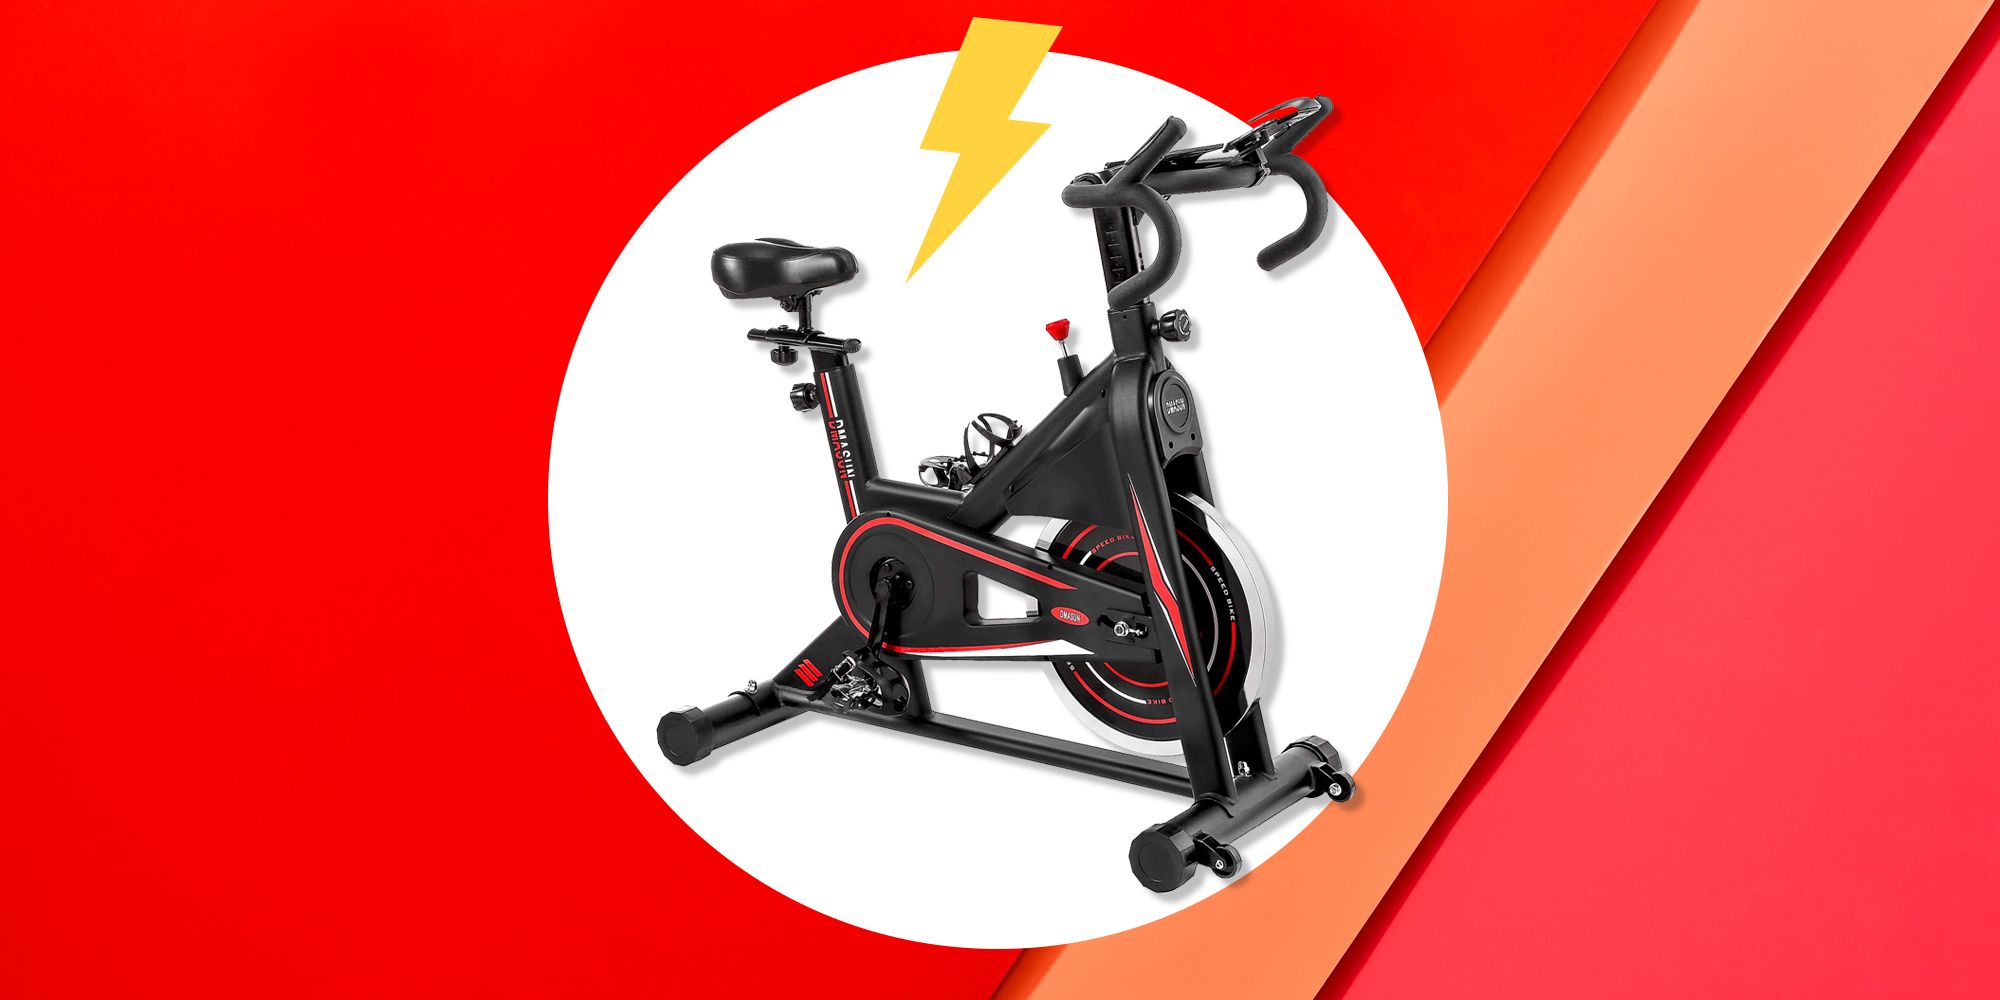 Stationary Exercise Bicycle Cardio Cycling Workout Fitness Indoor Sport Home Gym 